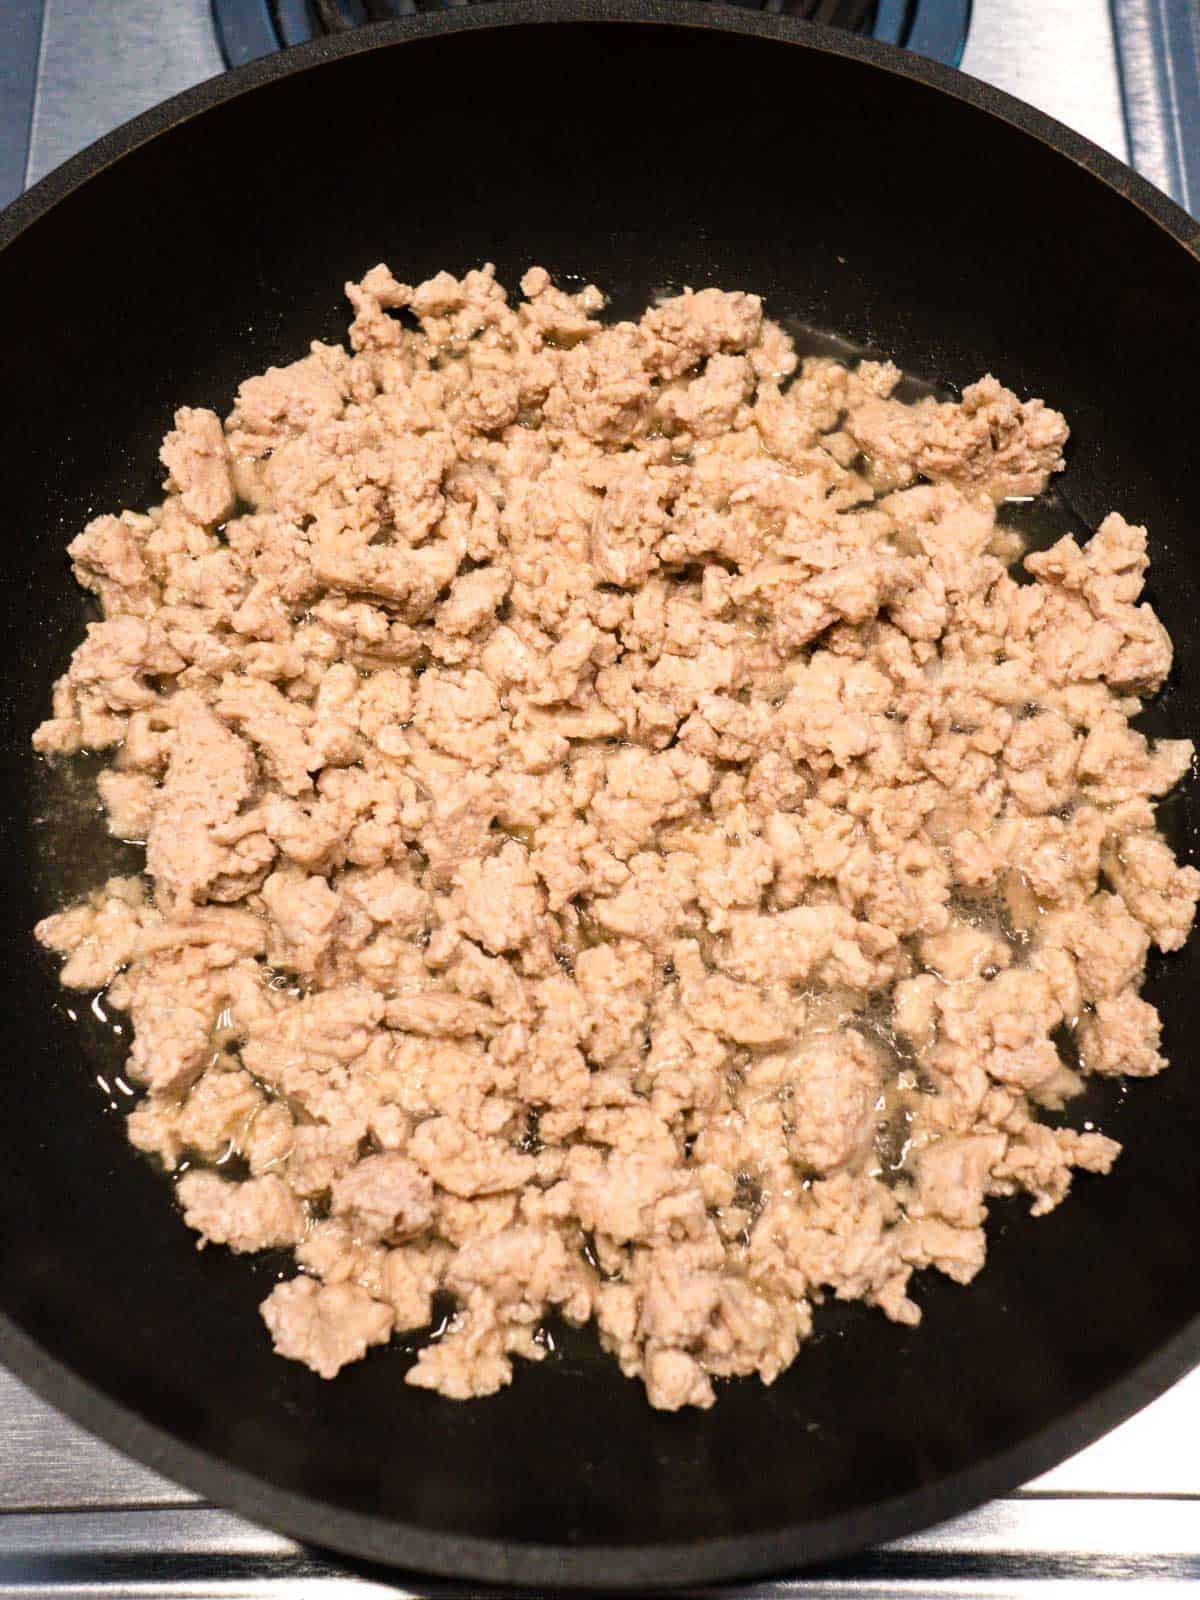 Cooked chicken in skillet.